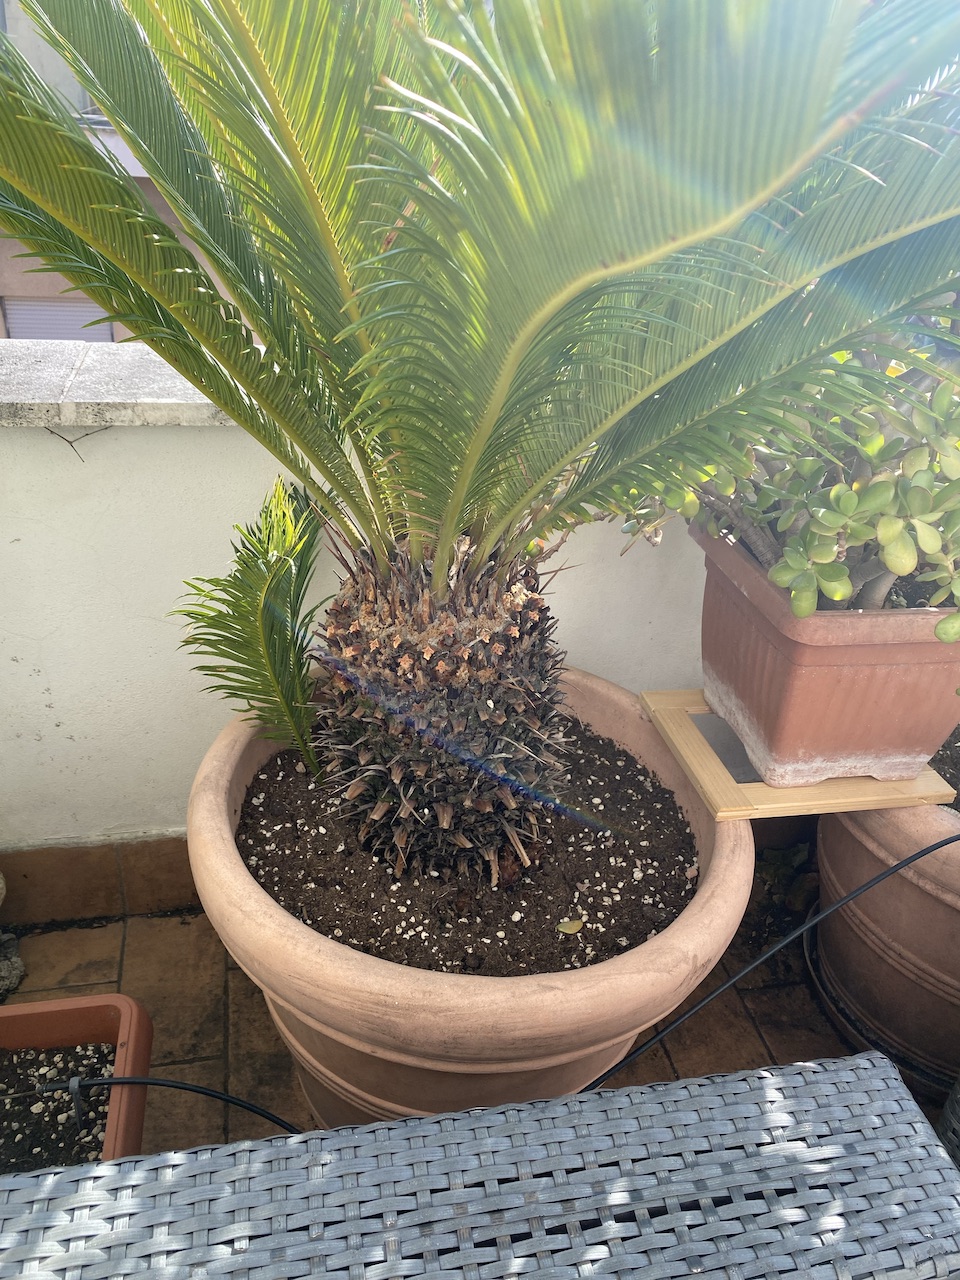 Cycad four weeks later, the leaves much greener